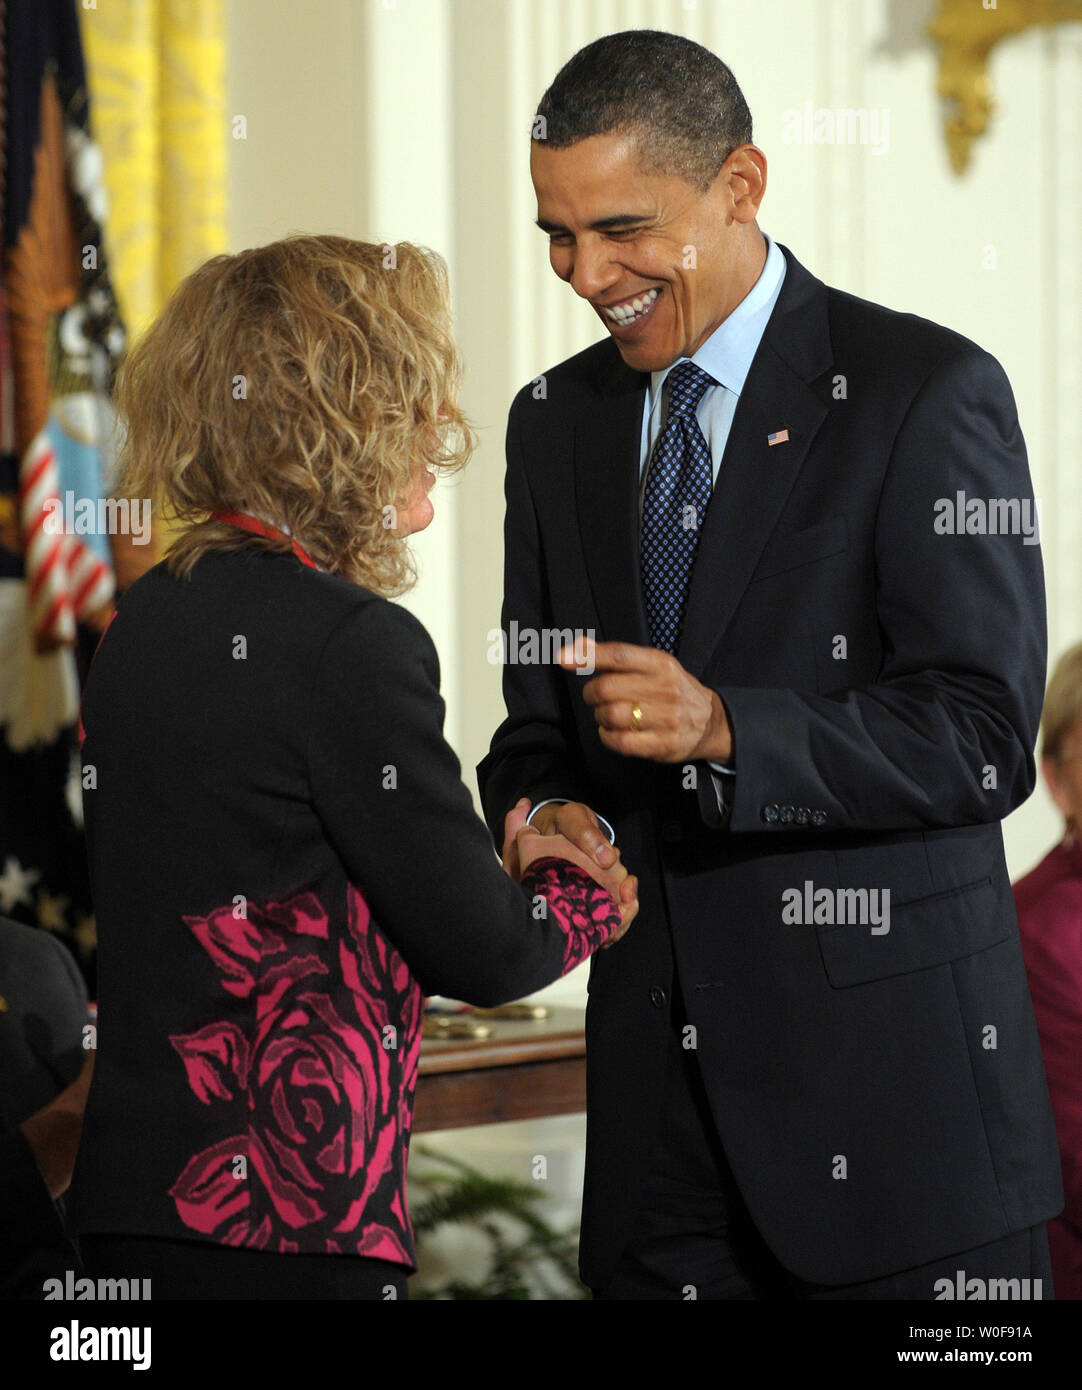 U.S. President Barack Obama awards Dr. Elaine Fuchs a National Medal of Science in the East Room of the White House in Washington on October 7, 2009. Fuchs was honored for 'her pioneering use of cell biology and molecular genetics in mice to understand the basis of inherited diseases in humans and her outstanding contributions to our understandings of the biology of skin and its disorders, including her notable investigations of adult skin stem cells, cancers, and genetic syndromes.'   UPI/Roger L. Wollenberg Stock Photo